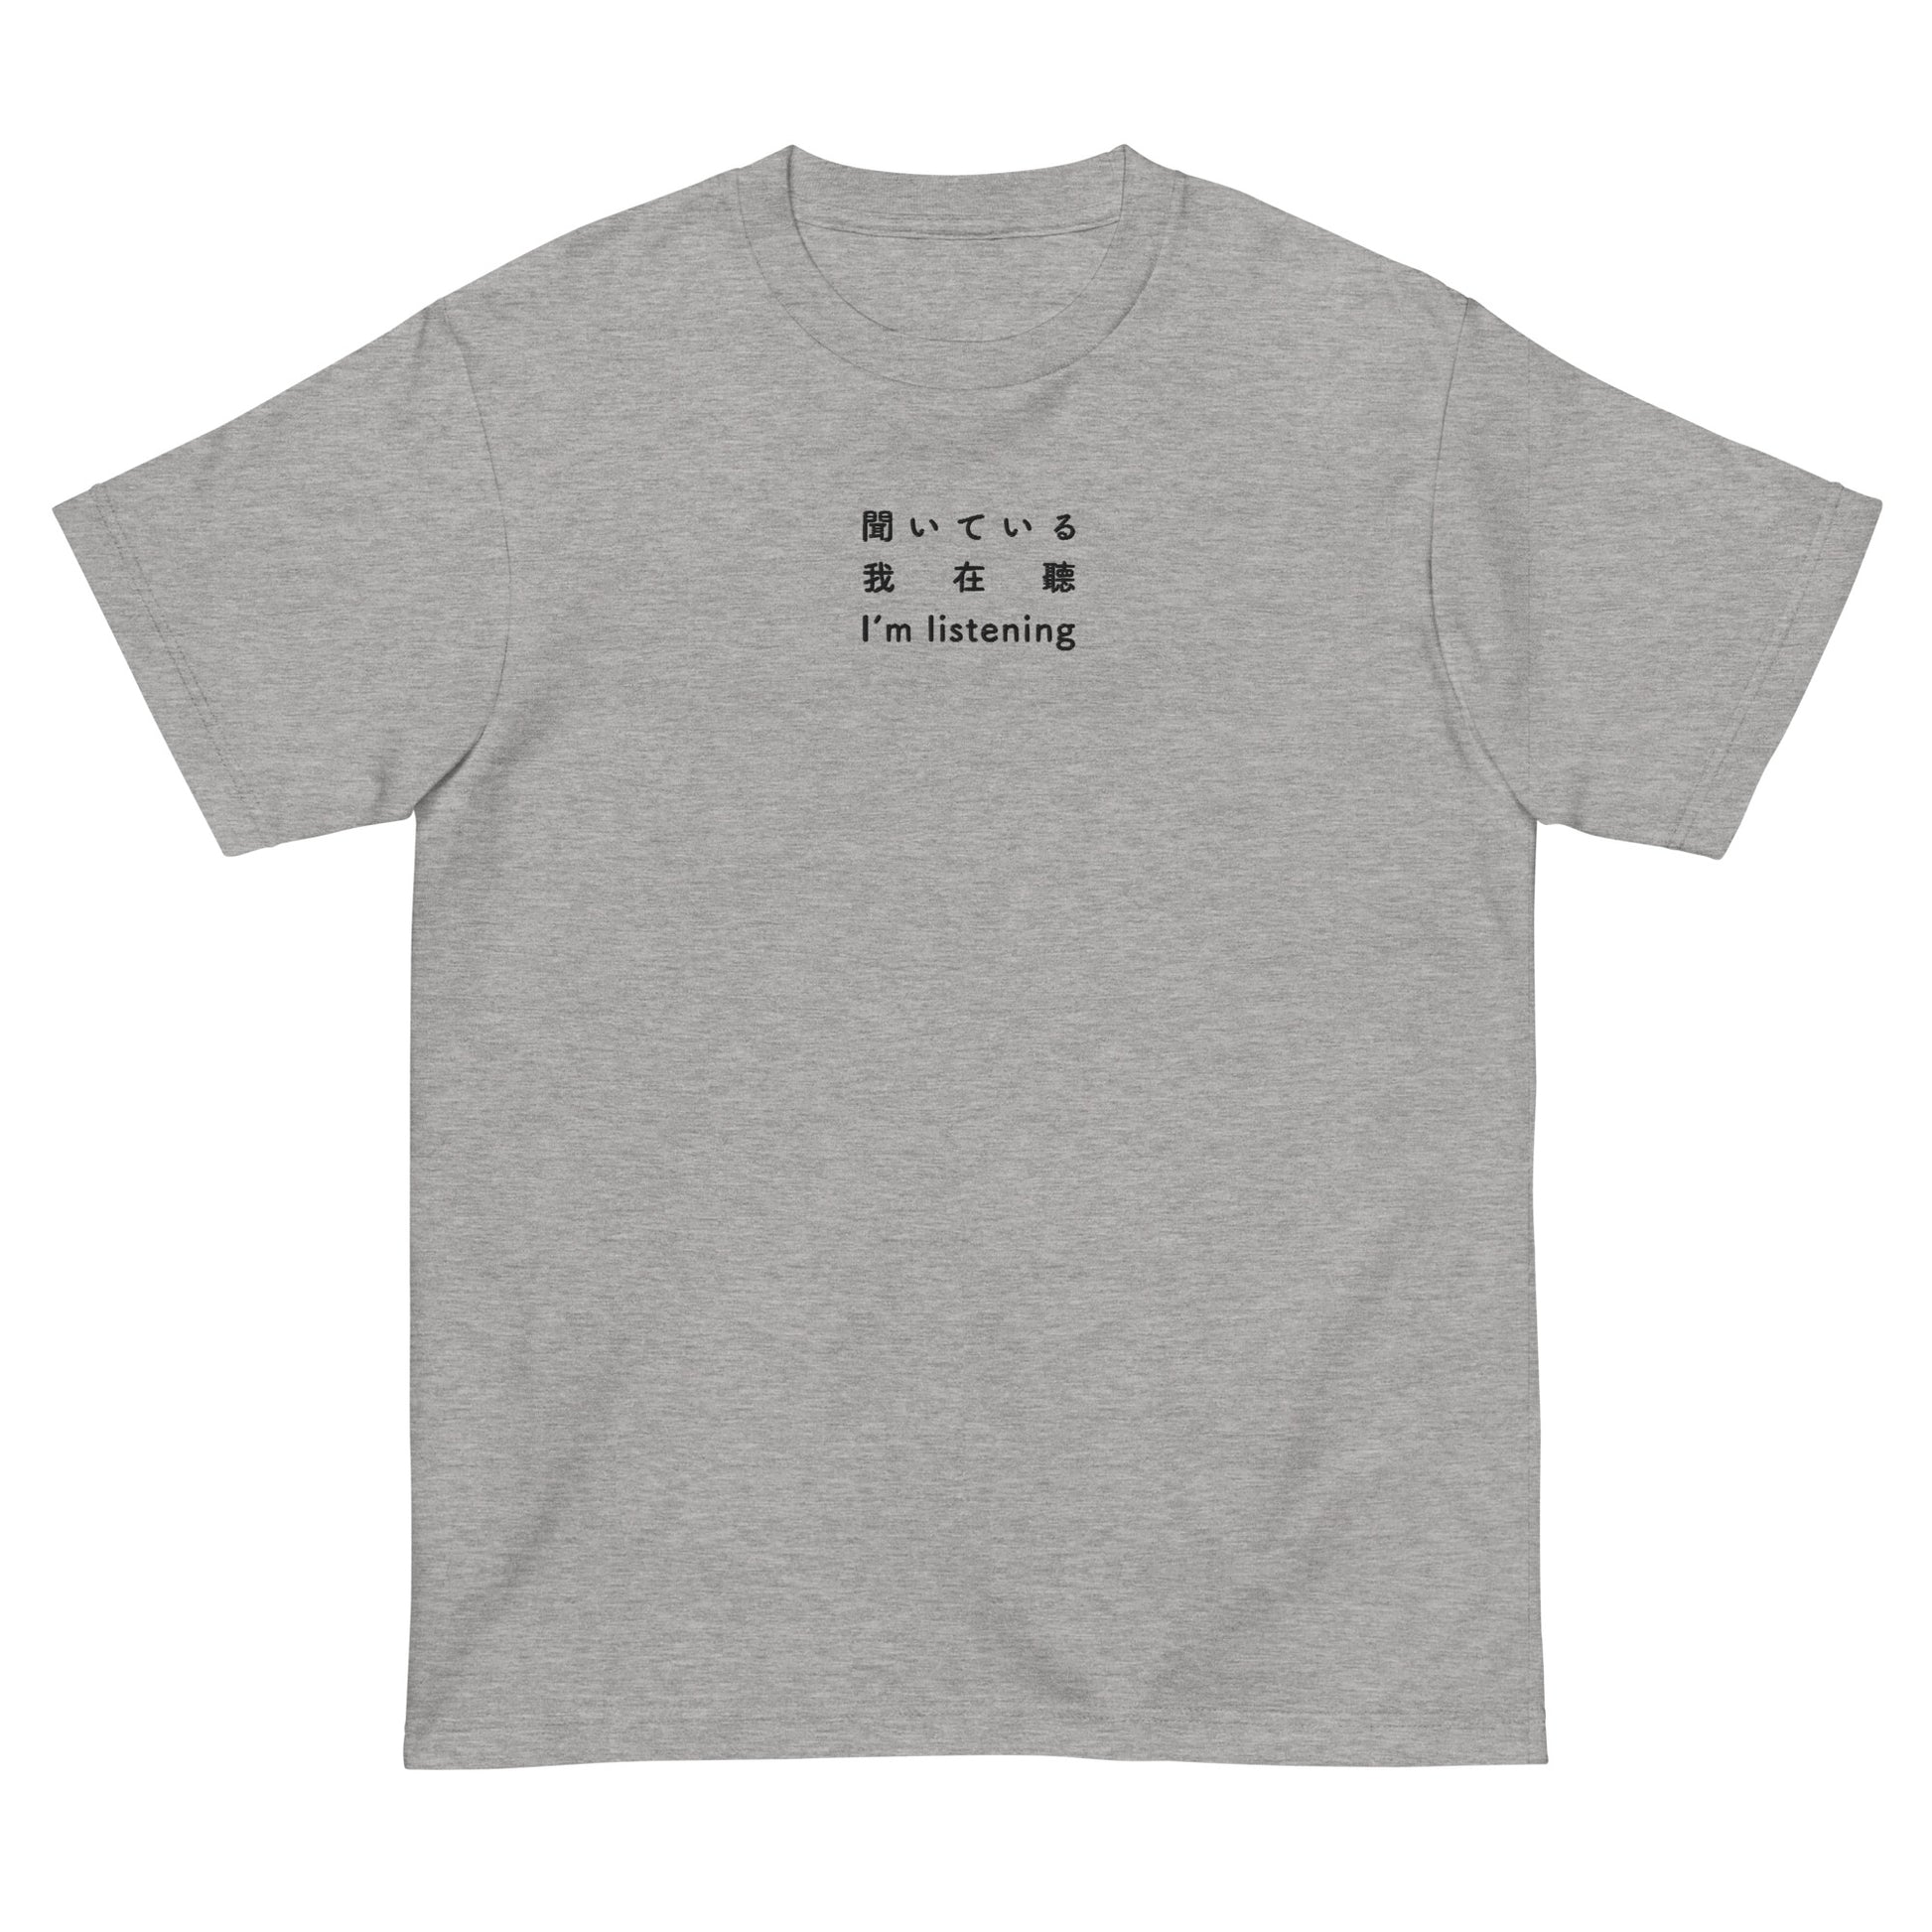 Light Gray High Quality Tee - Front Design with an Black Embroidery "I'm listening" in Japanese,Chinese and English